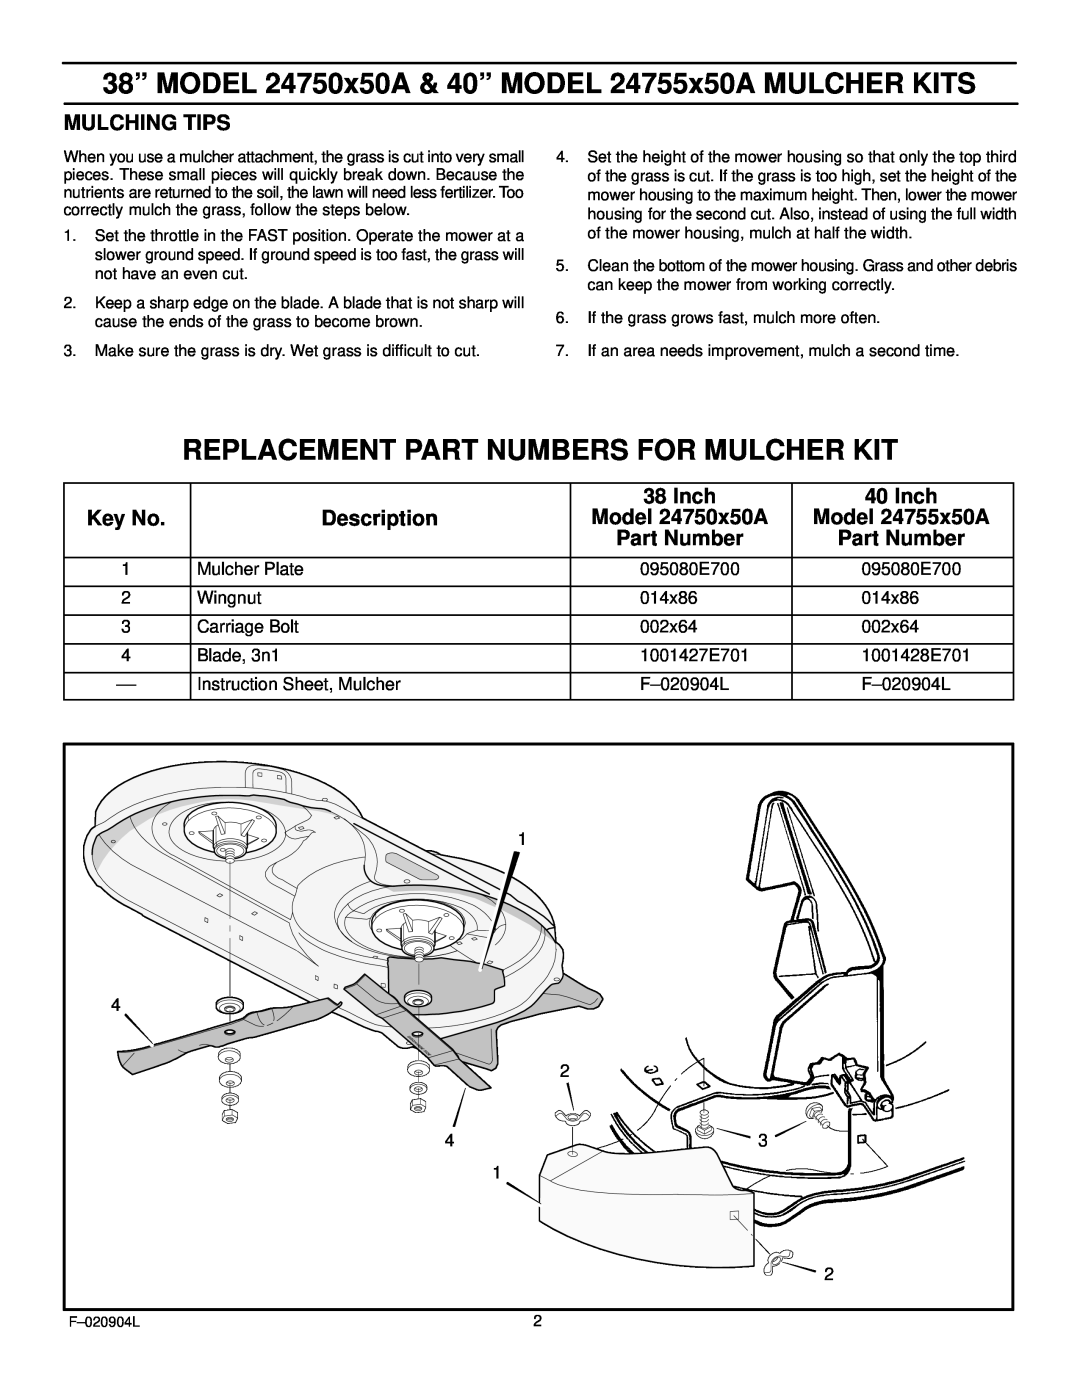 Rover 24755x50A manual Replacement Part Numbers For Mulcher Kit, Mulching Tips, Inch, Description, Model 24750x50A 